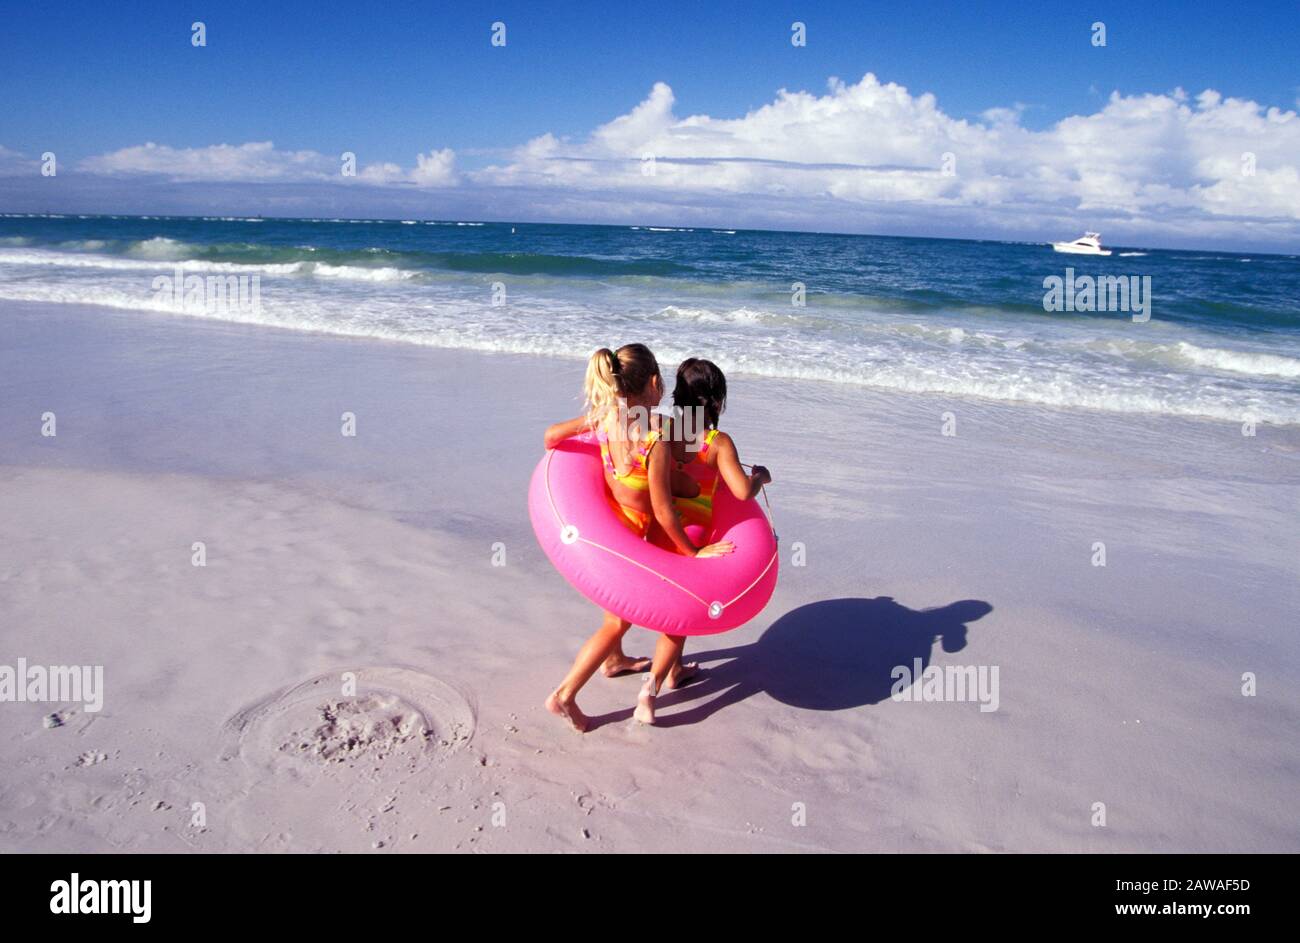 Two girls playing with an inner tube on the beach on summer vacation Stock Photo